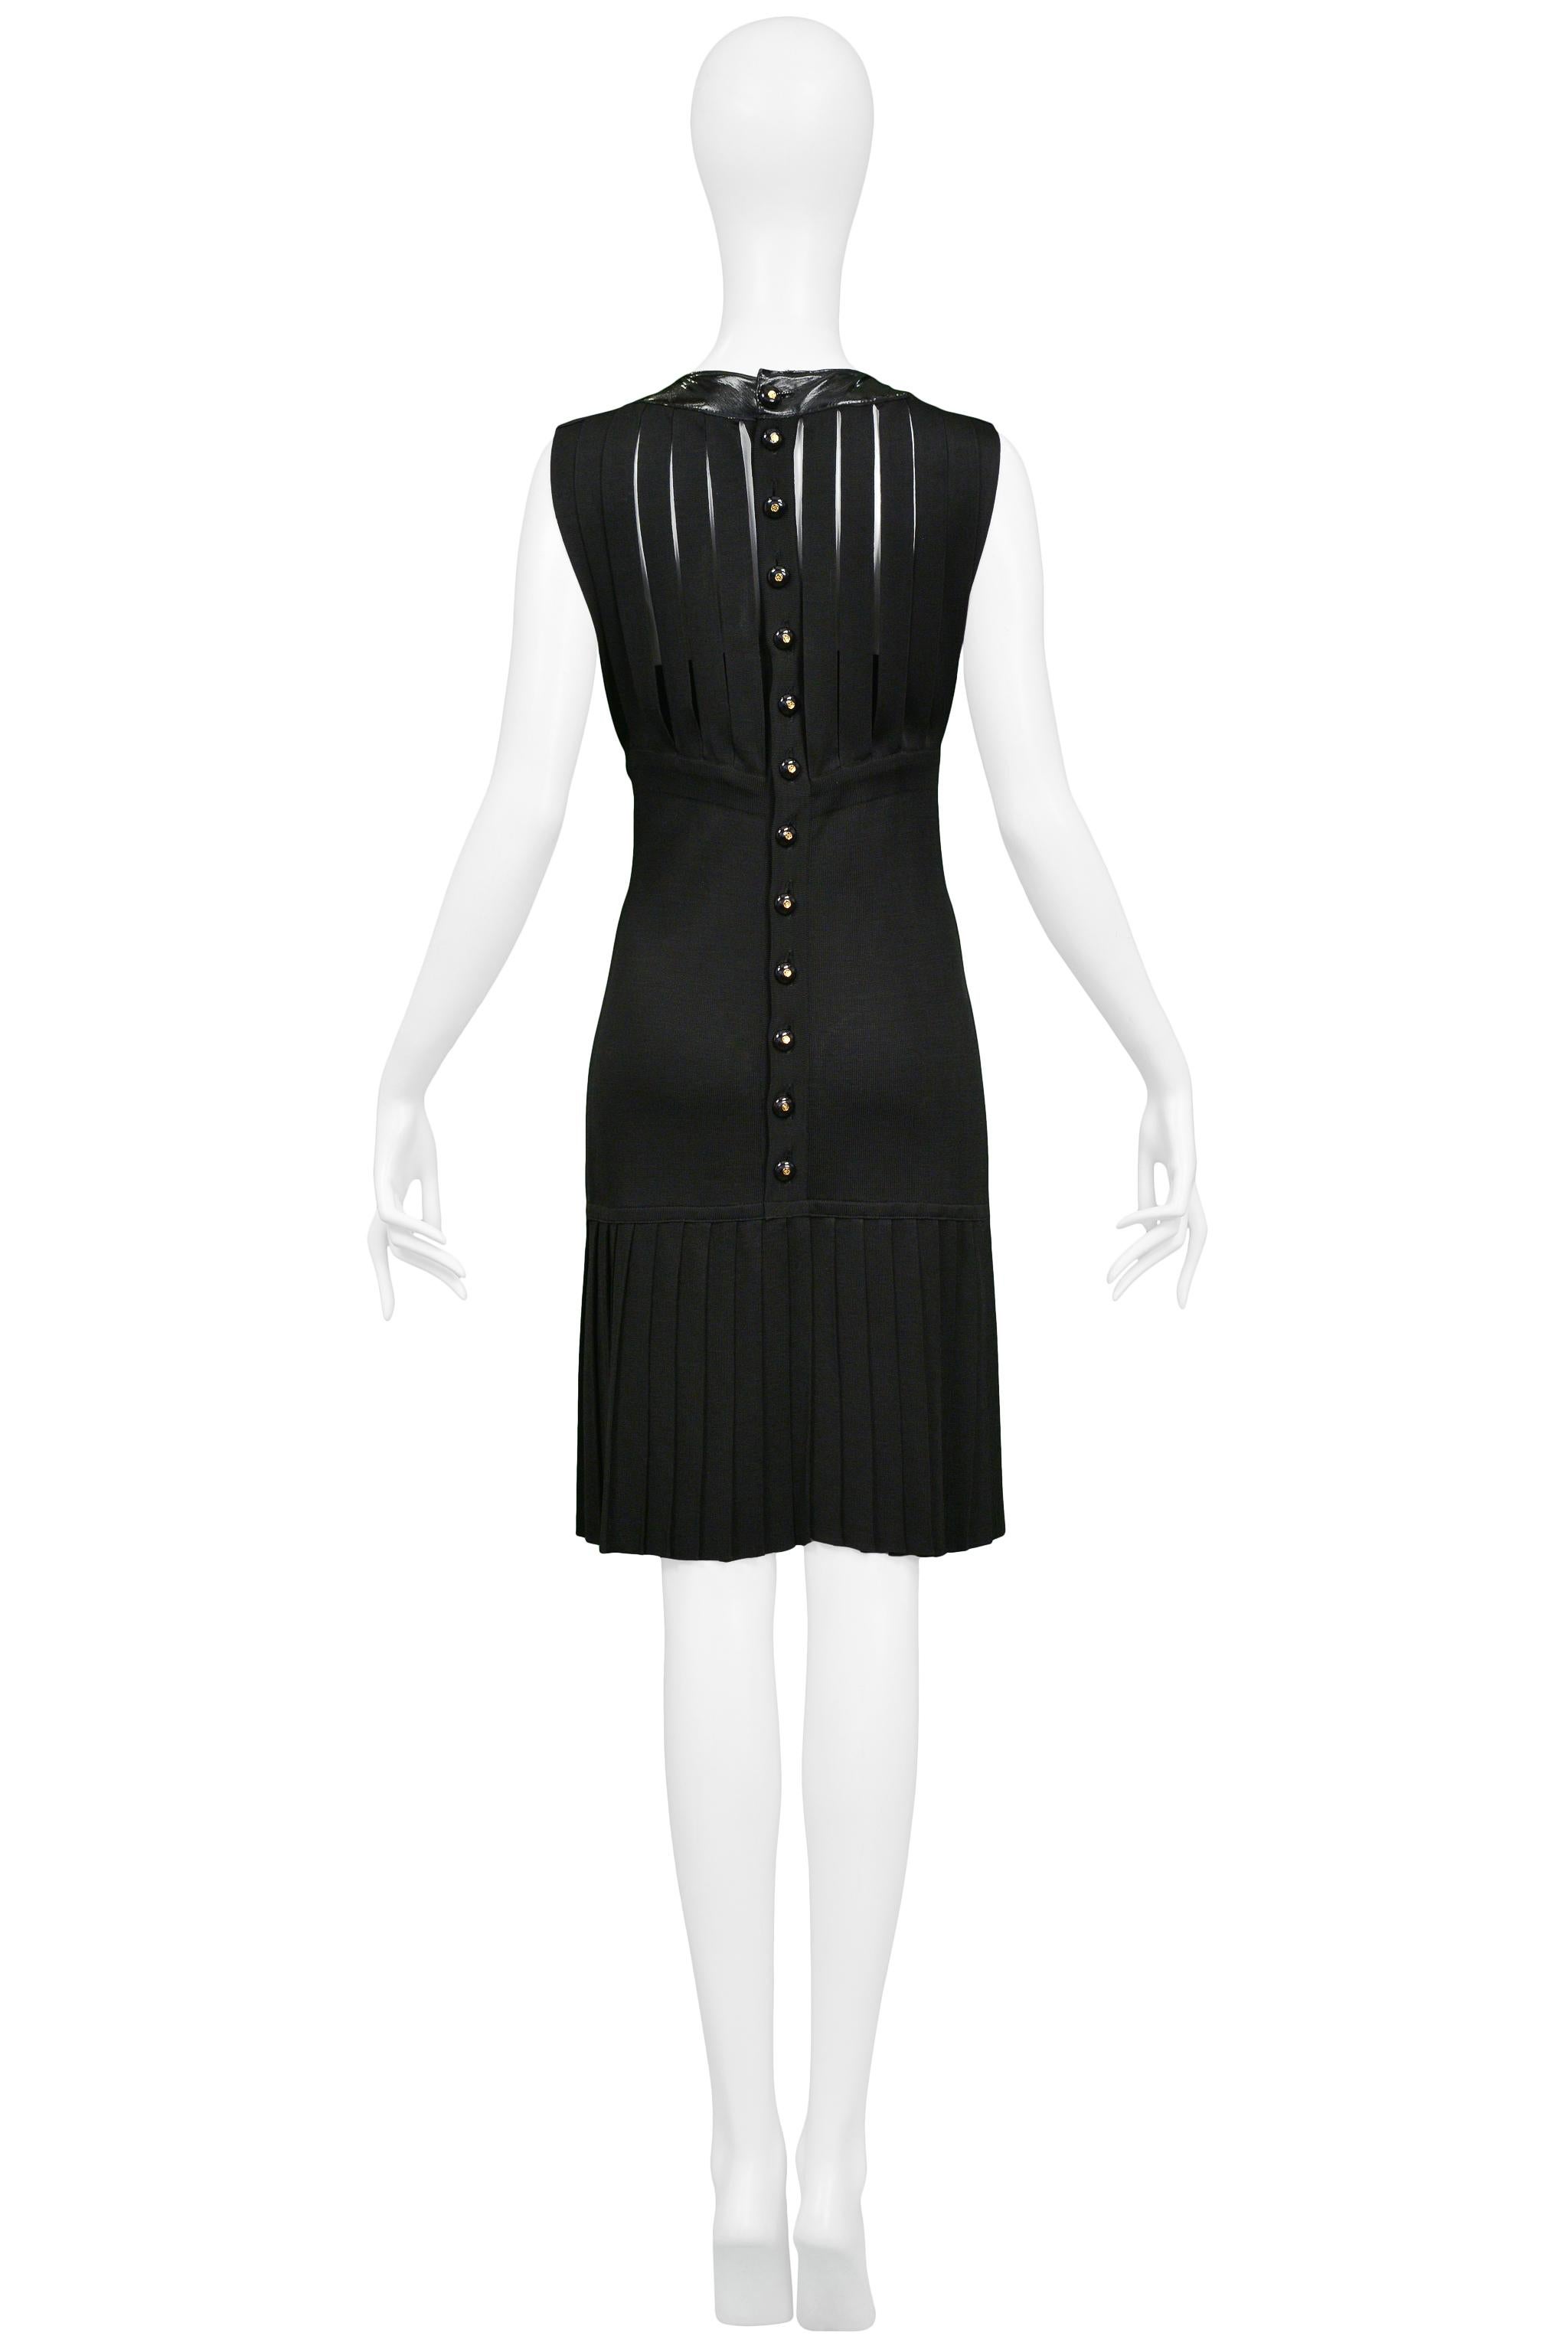 Chanel Black Knit & Wet Look Cage Dress For Sale 1